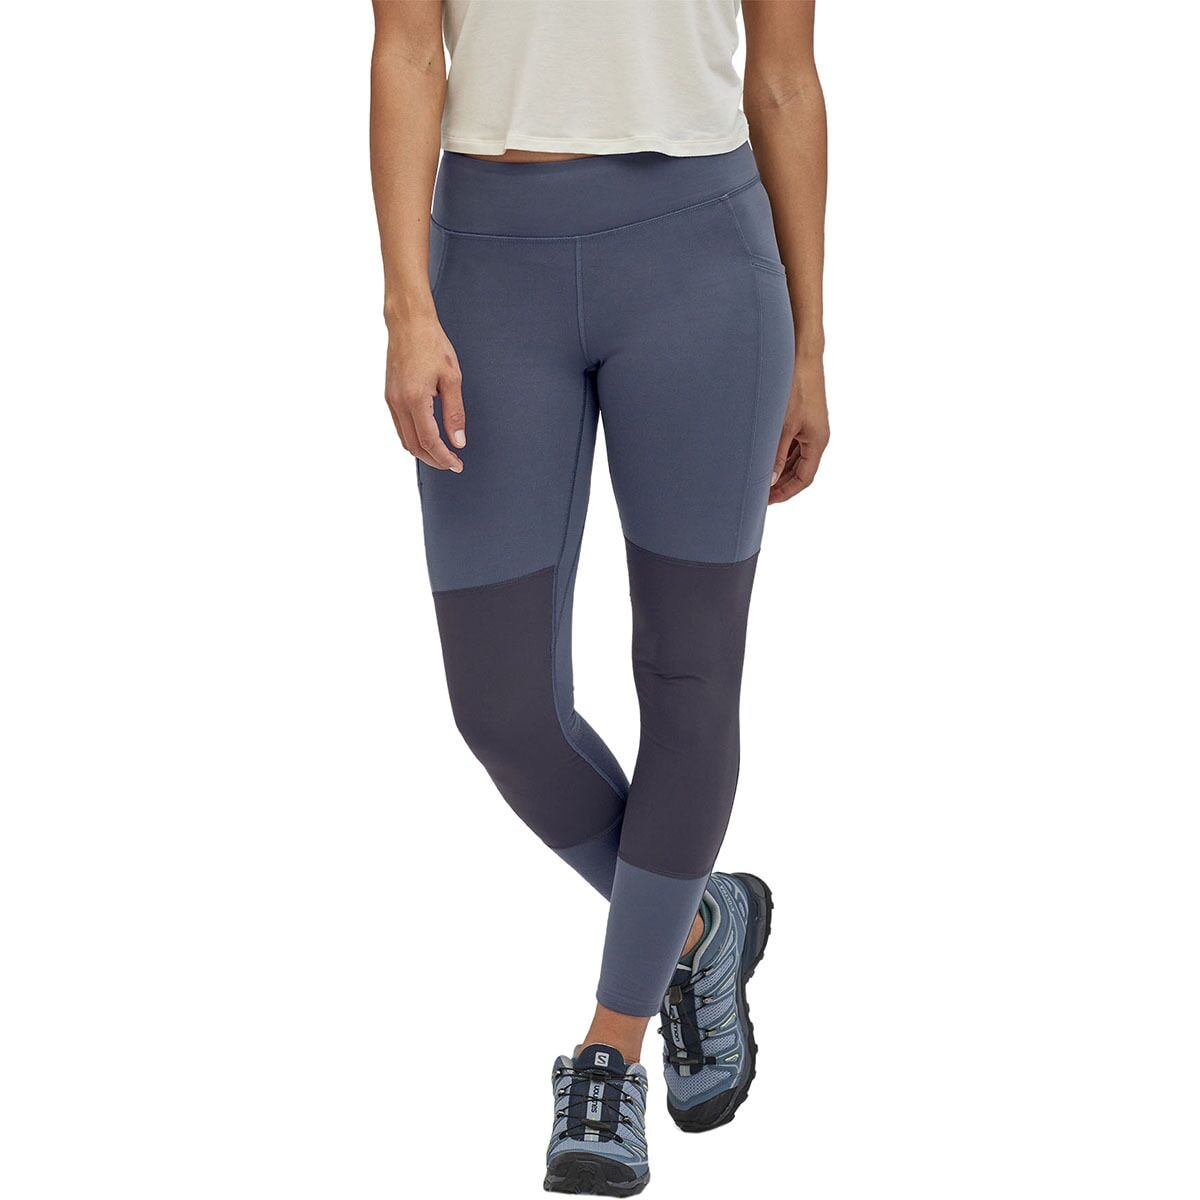 Patagonia Pack Out Hike Tights - Leggings Women's